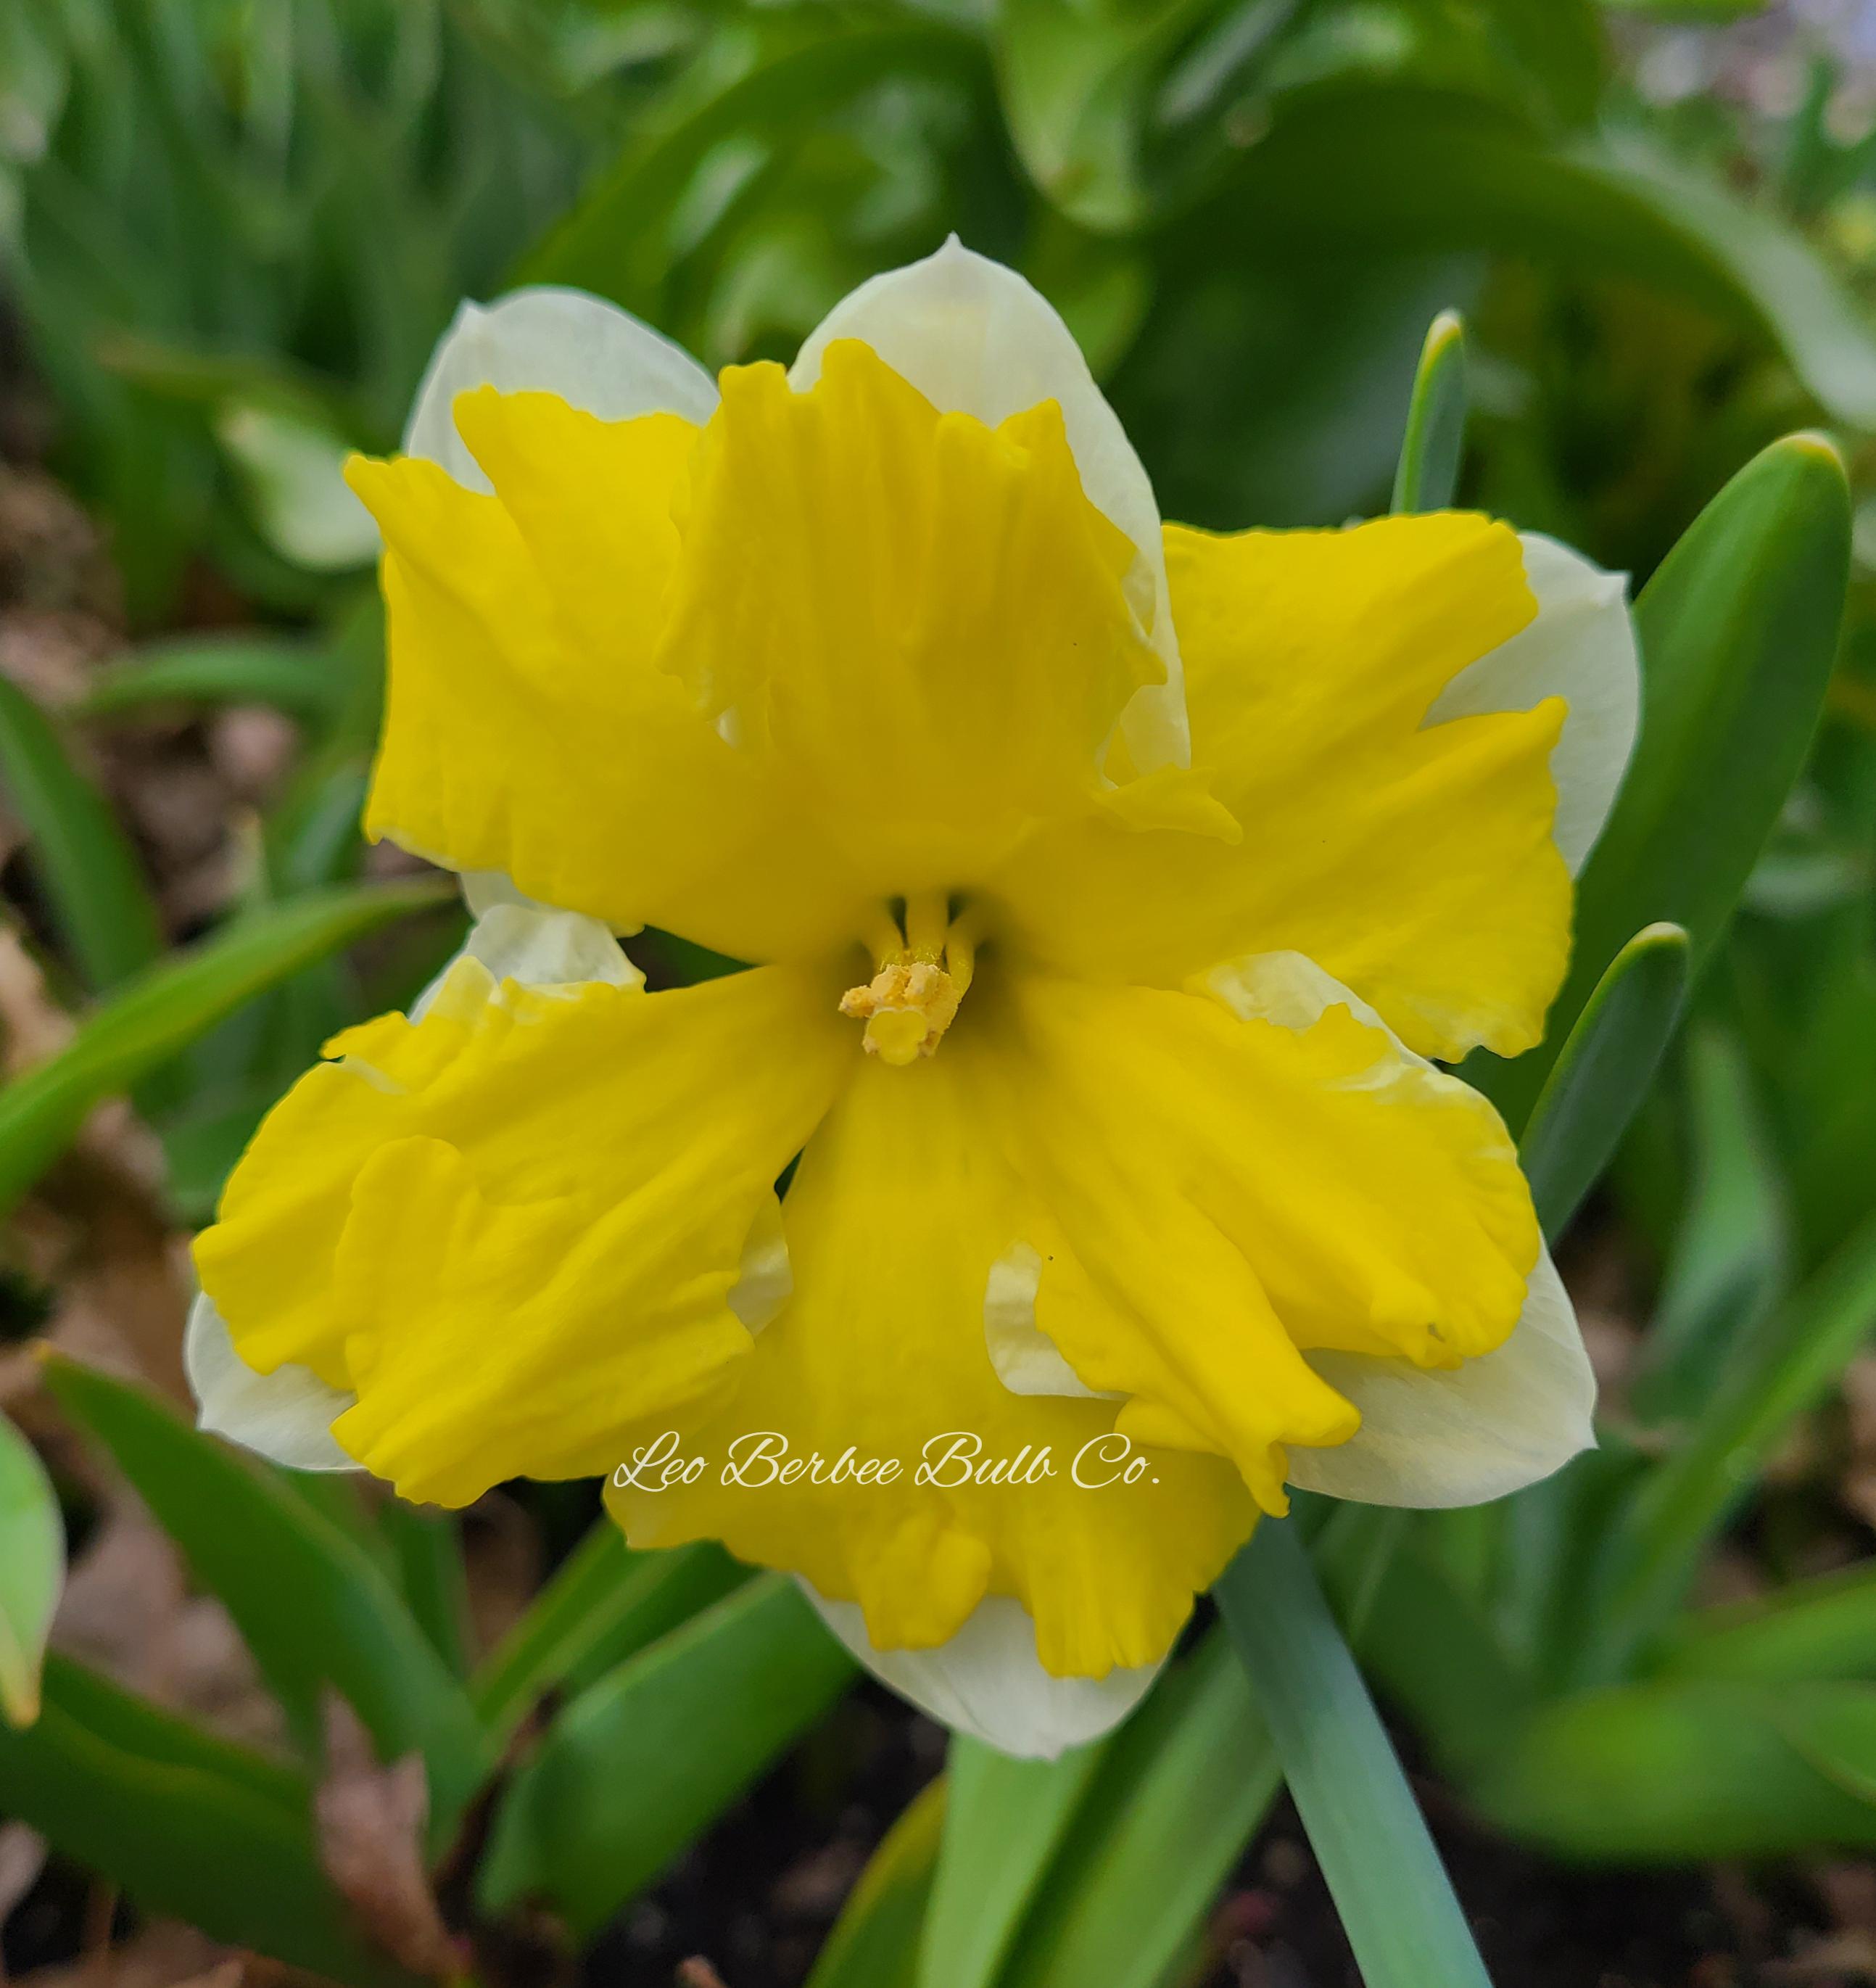 Daffodil Split Cupped 'Cassata' - Coming Soon for Fall 2022! from Leo Berbee Bulb Company